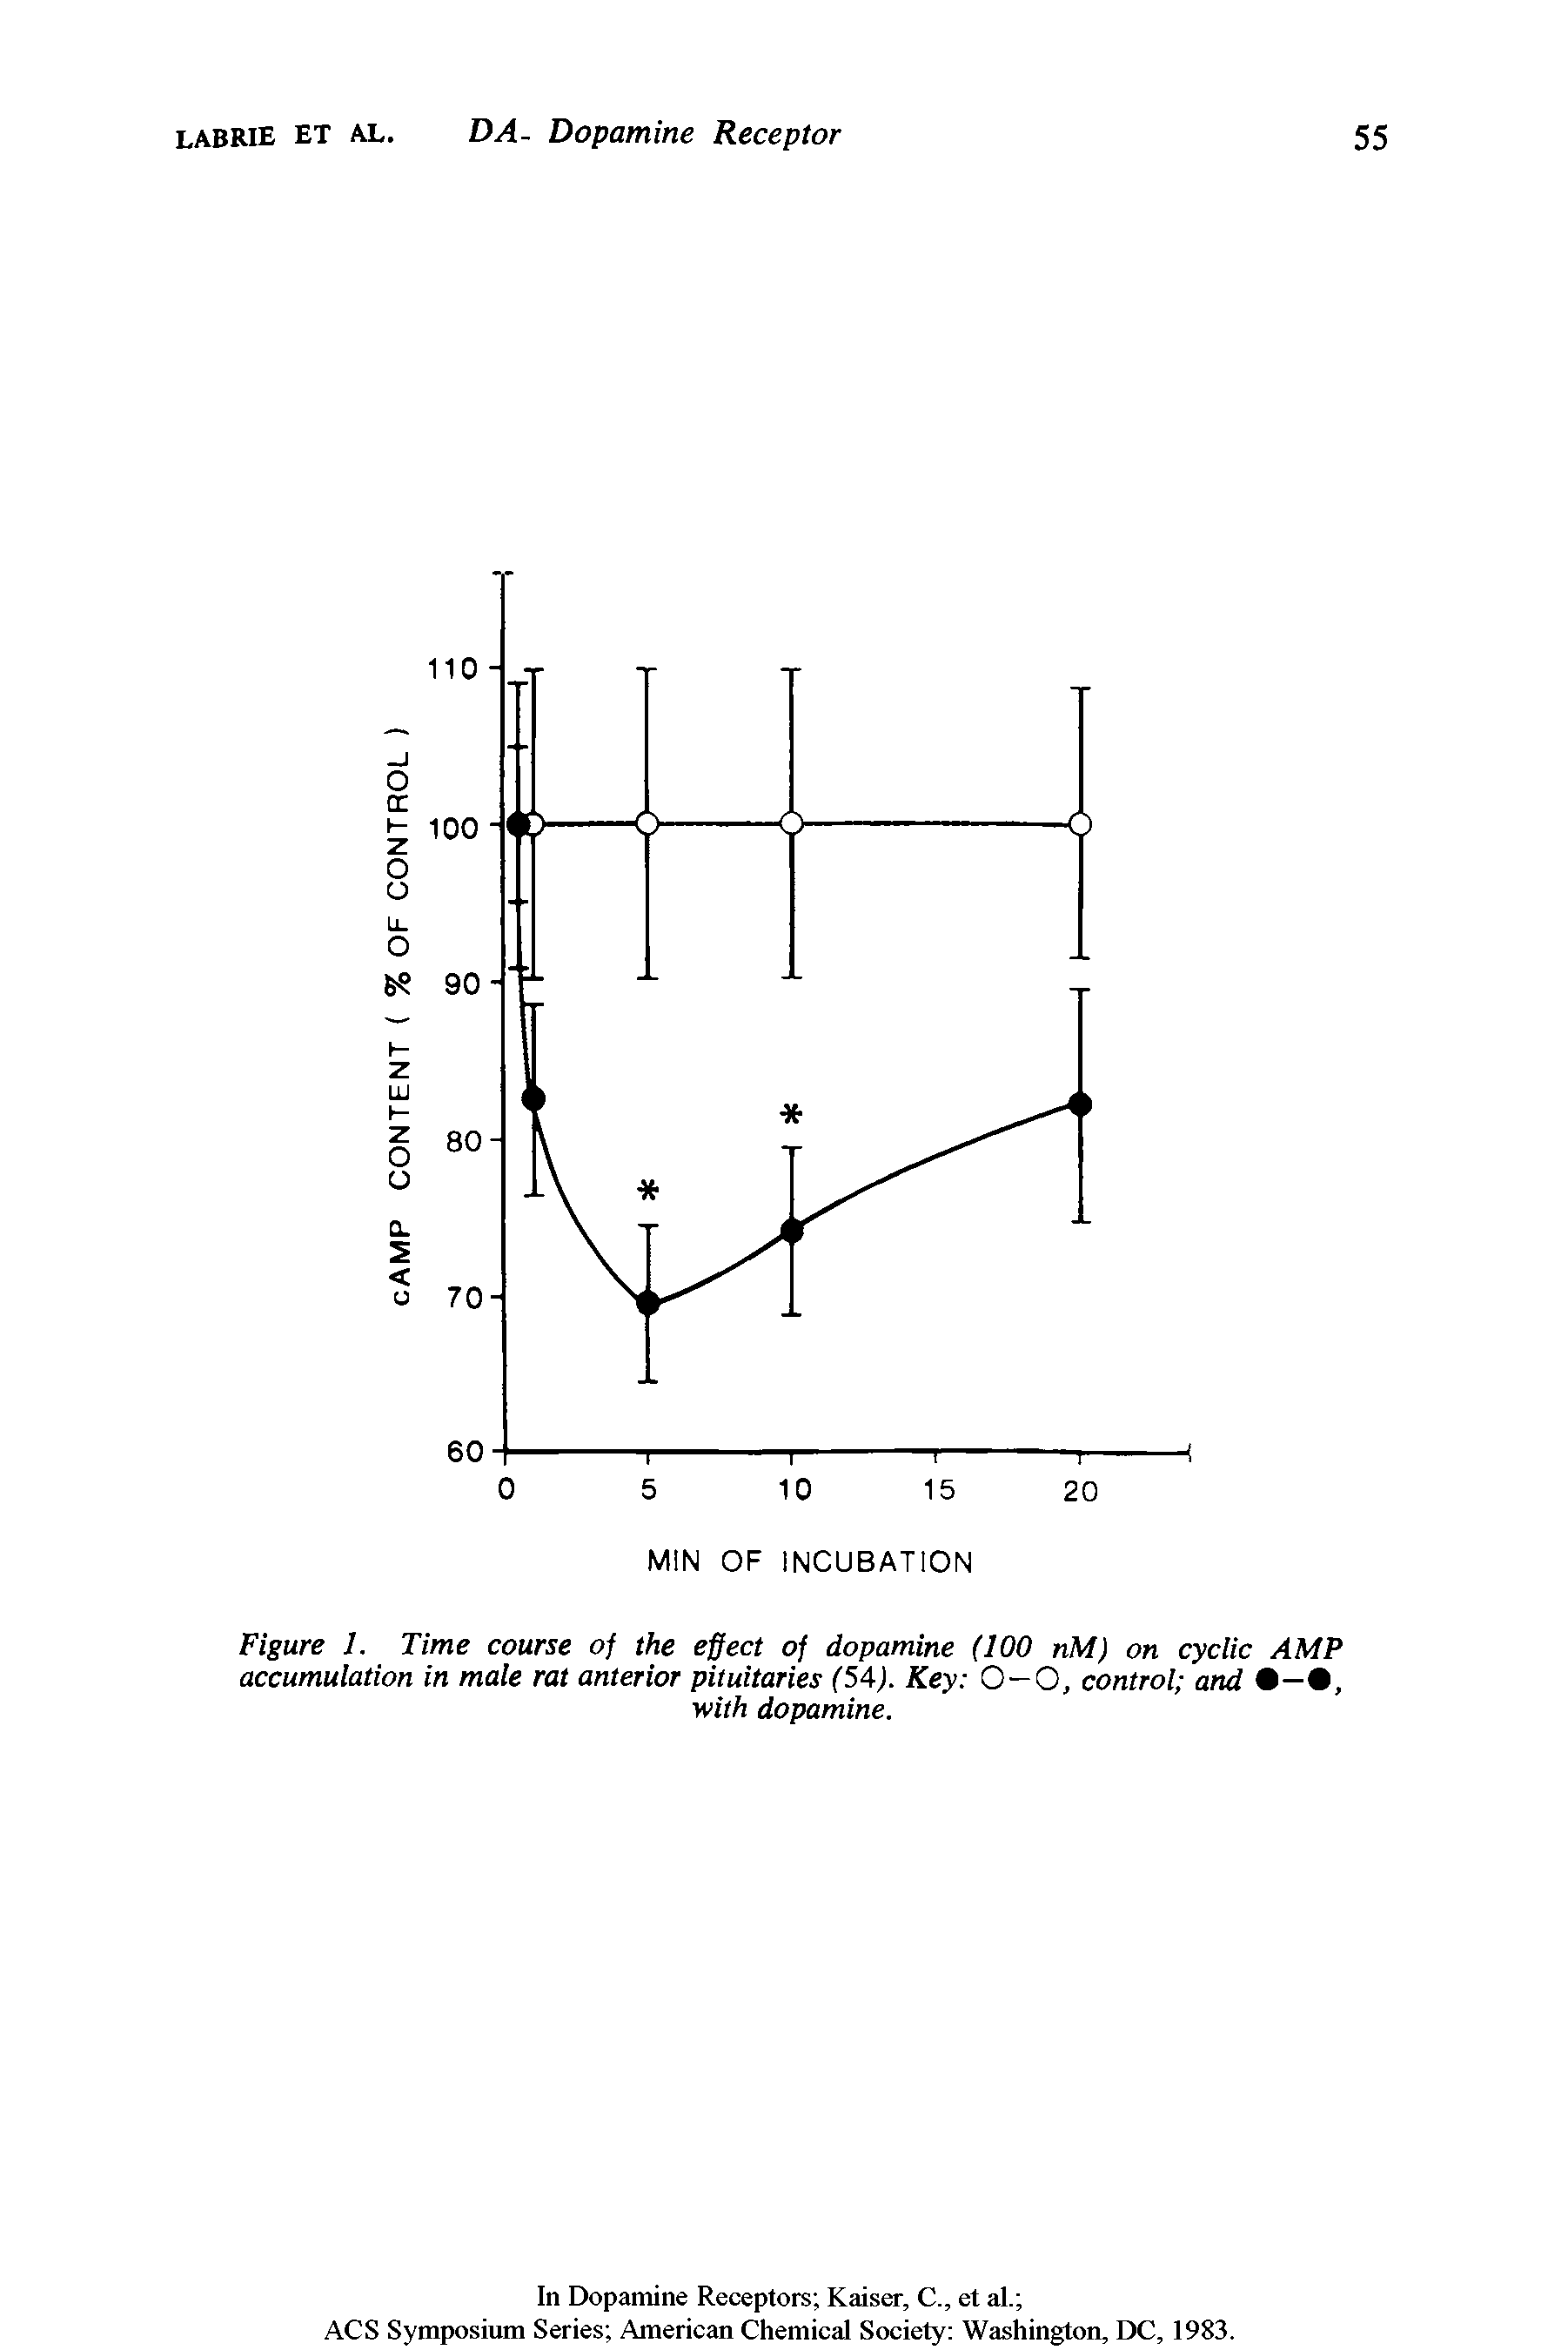 Figure 1. Time course of the effect of dopamine (100 nM) on cyclic AMP accumulation in male rat anterior pituitaries (5A). Key O—O, control and...